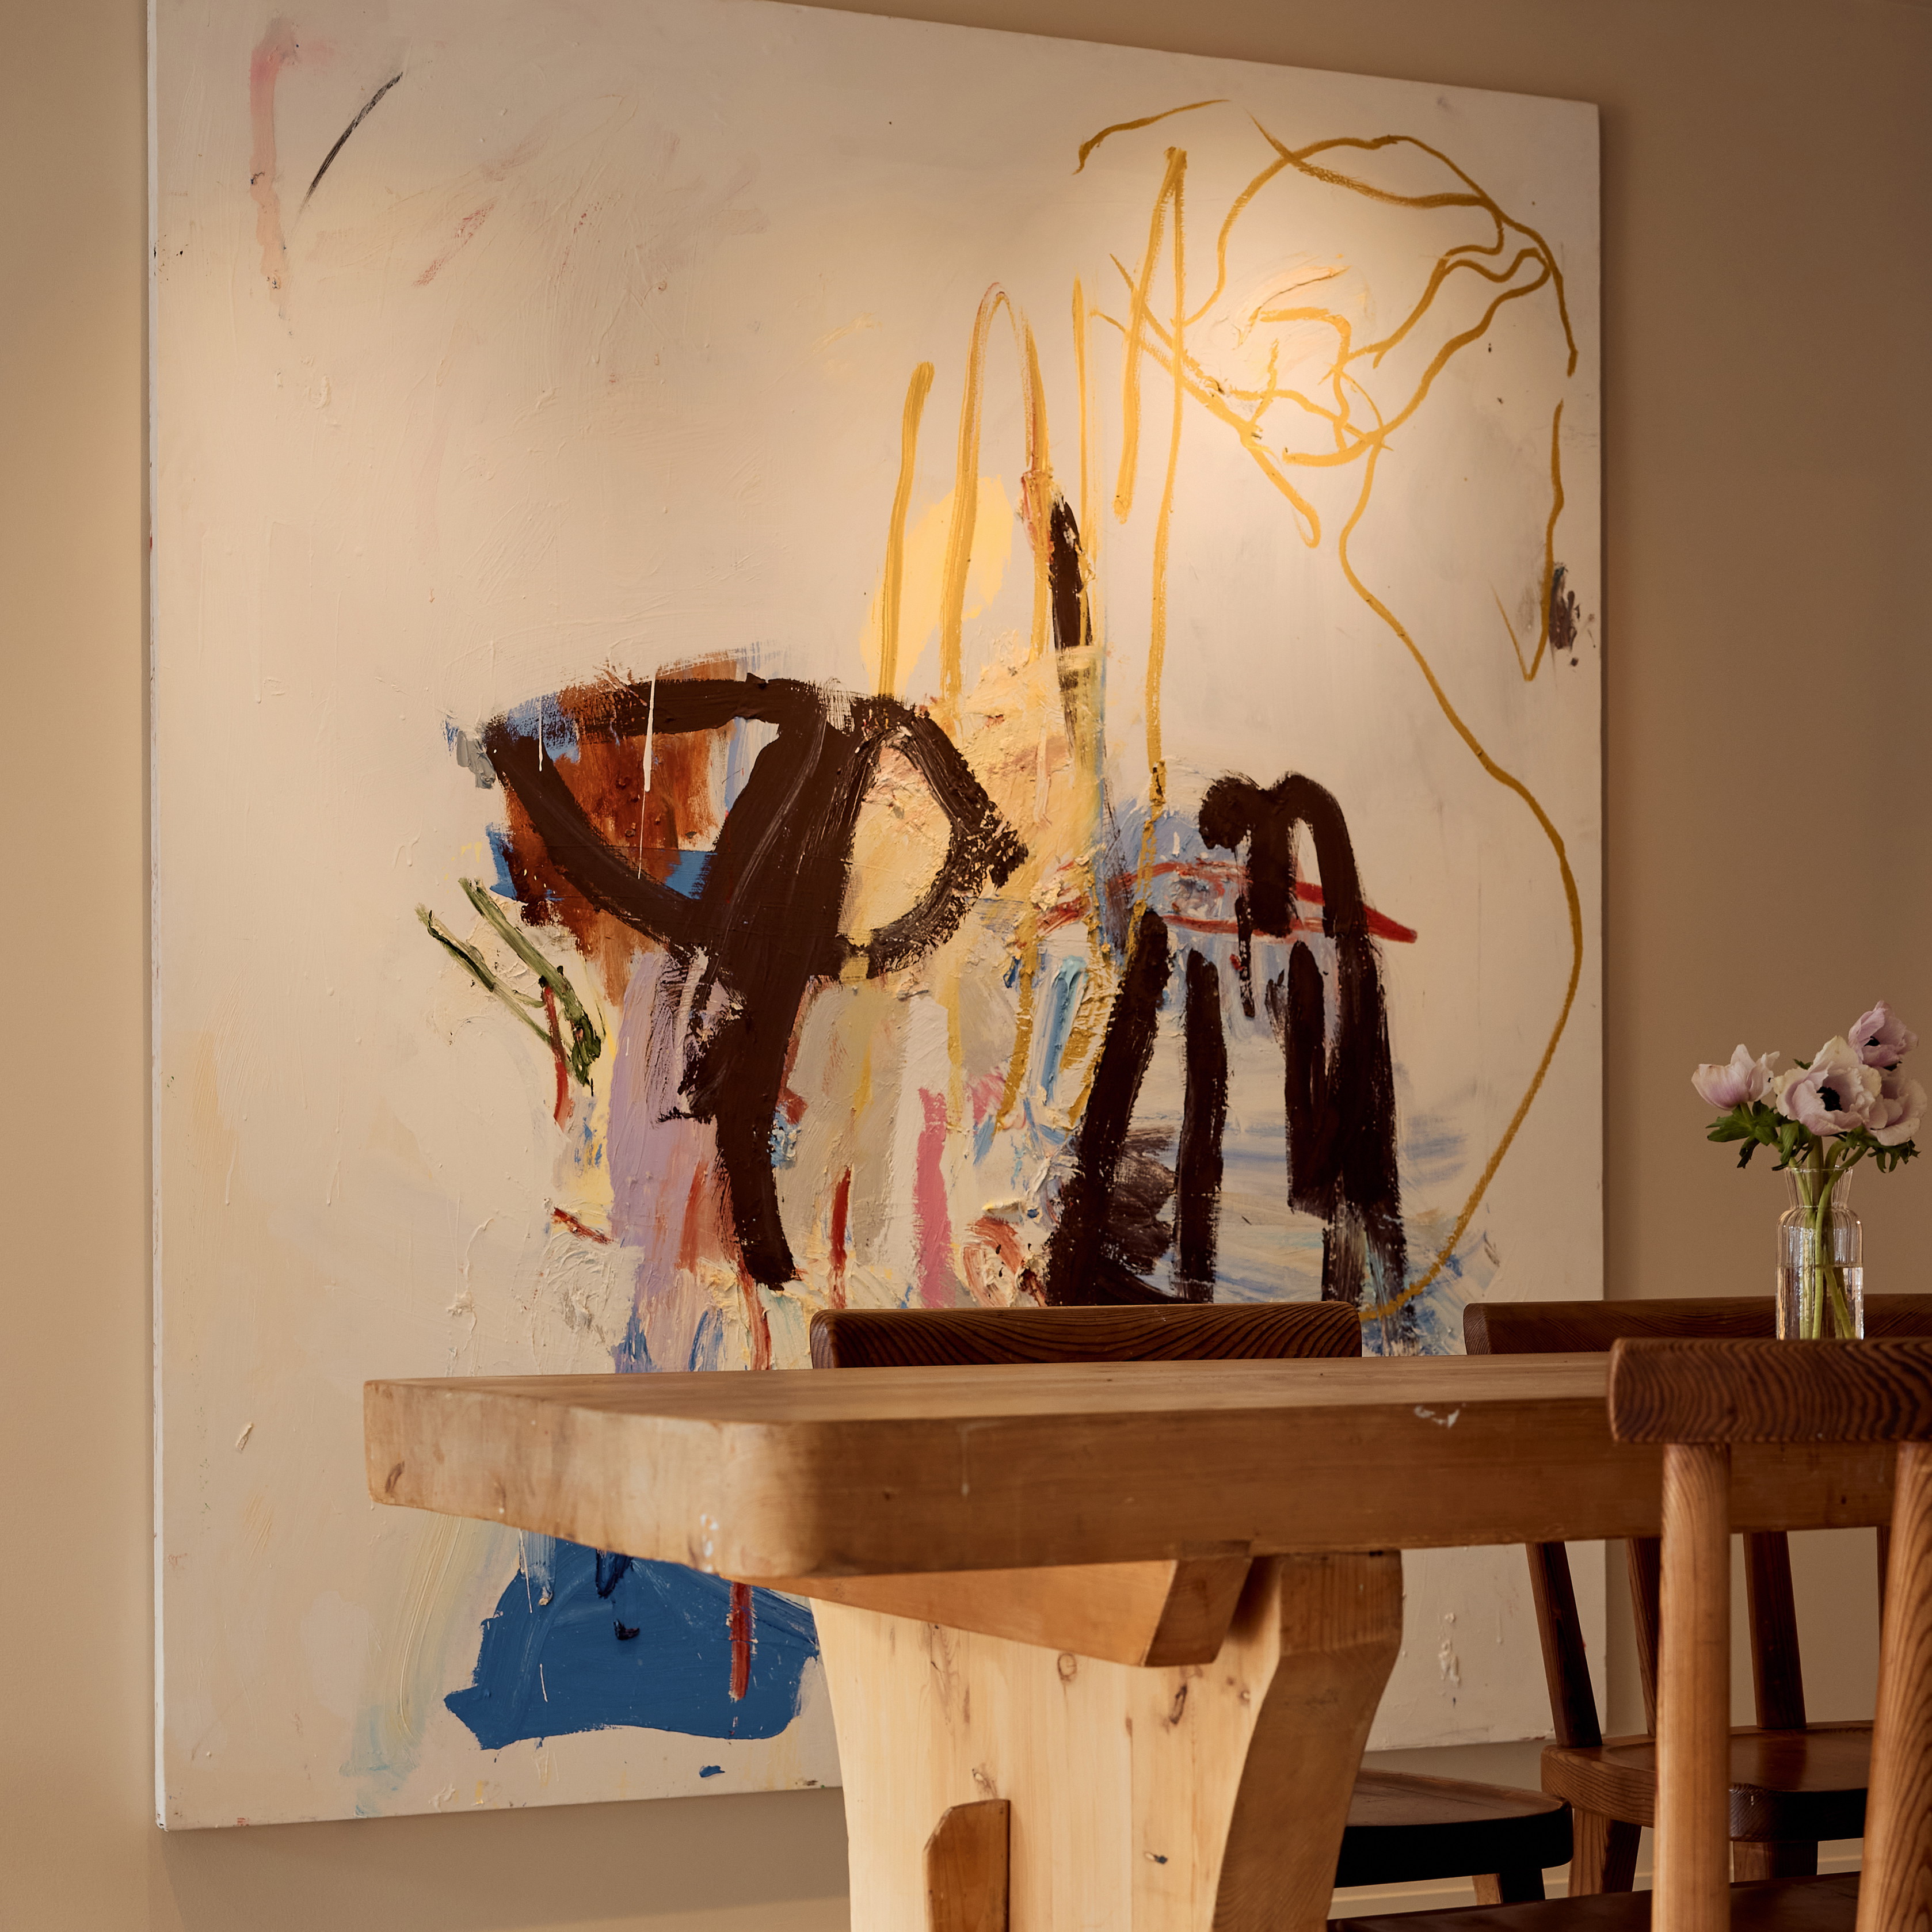 a wooden table with chairs and a painting on the wall